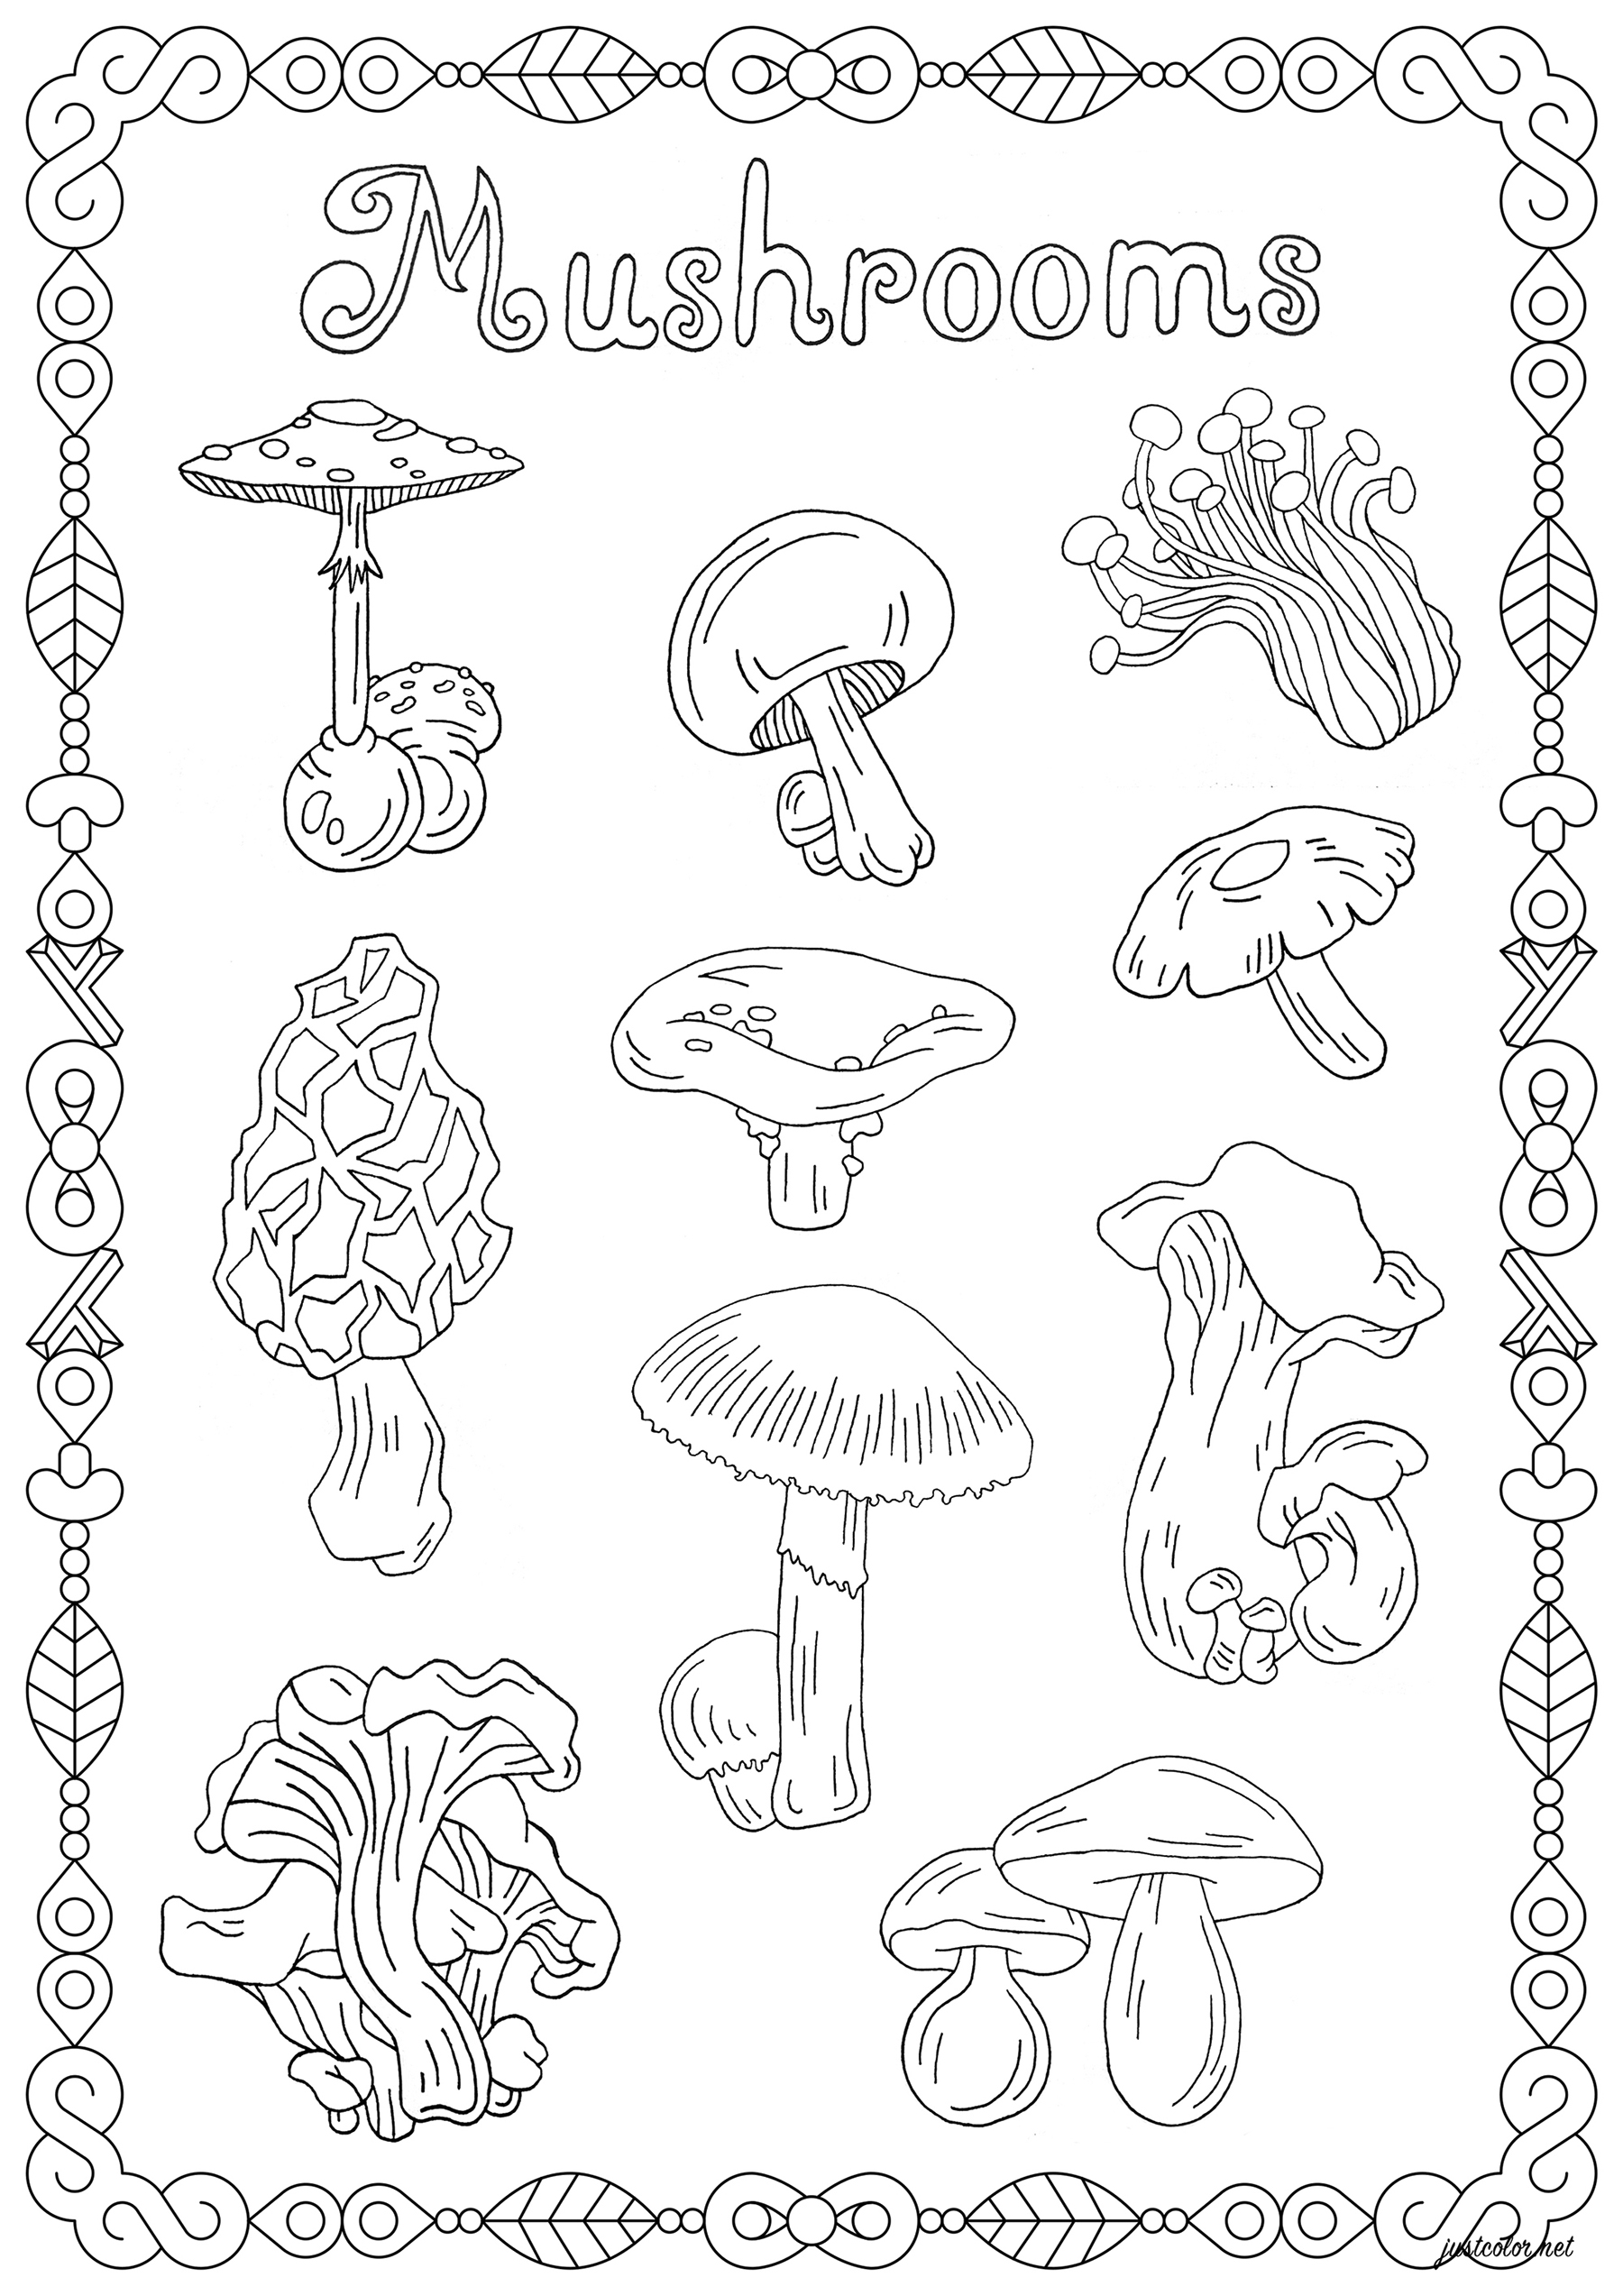 Color these different mushroom varieties, the beautiful frame around them, and the word 'Mushrooms', Artist : Lucie